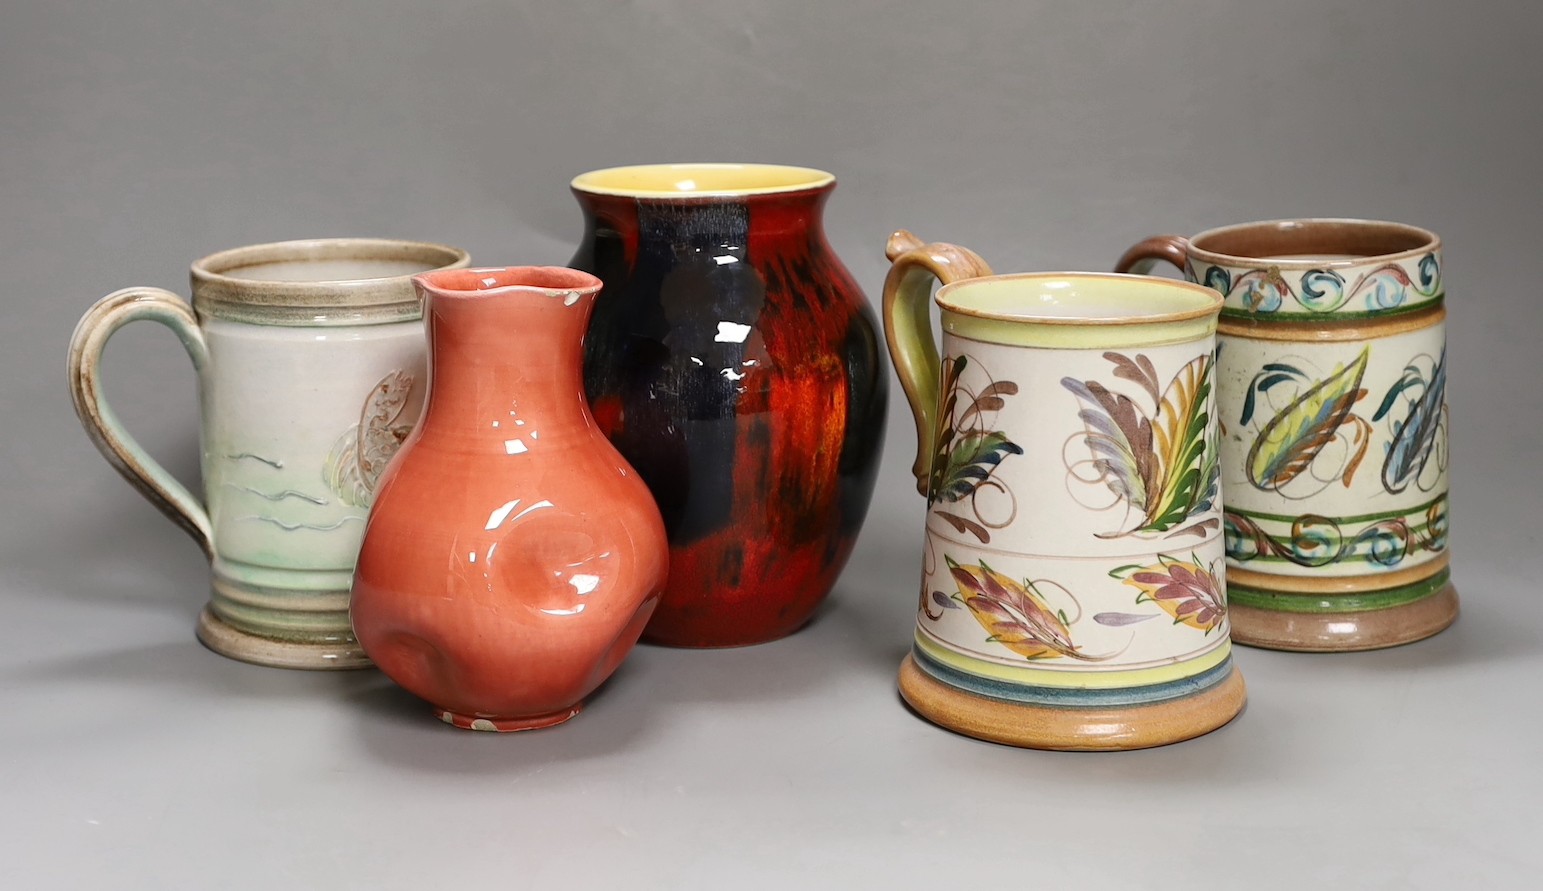 Three Glyn College jugs, a flambé Poole vase and a Burmantoft ‘White’ dimpled vase no. 989, tallest 16.5cm